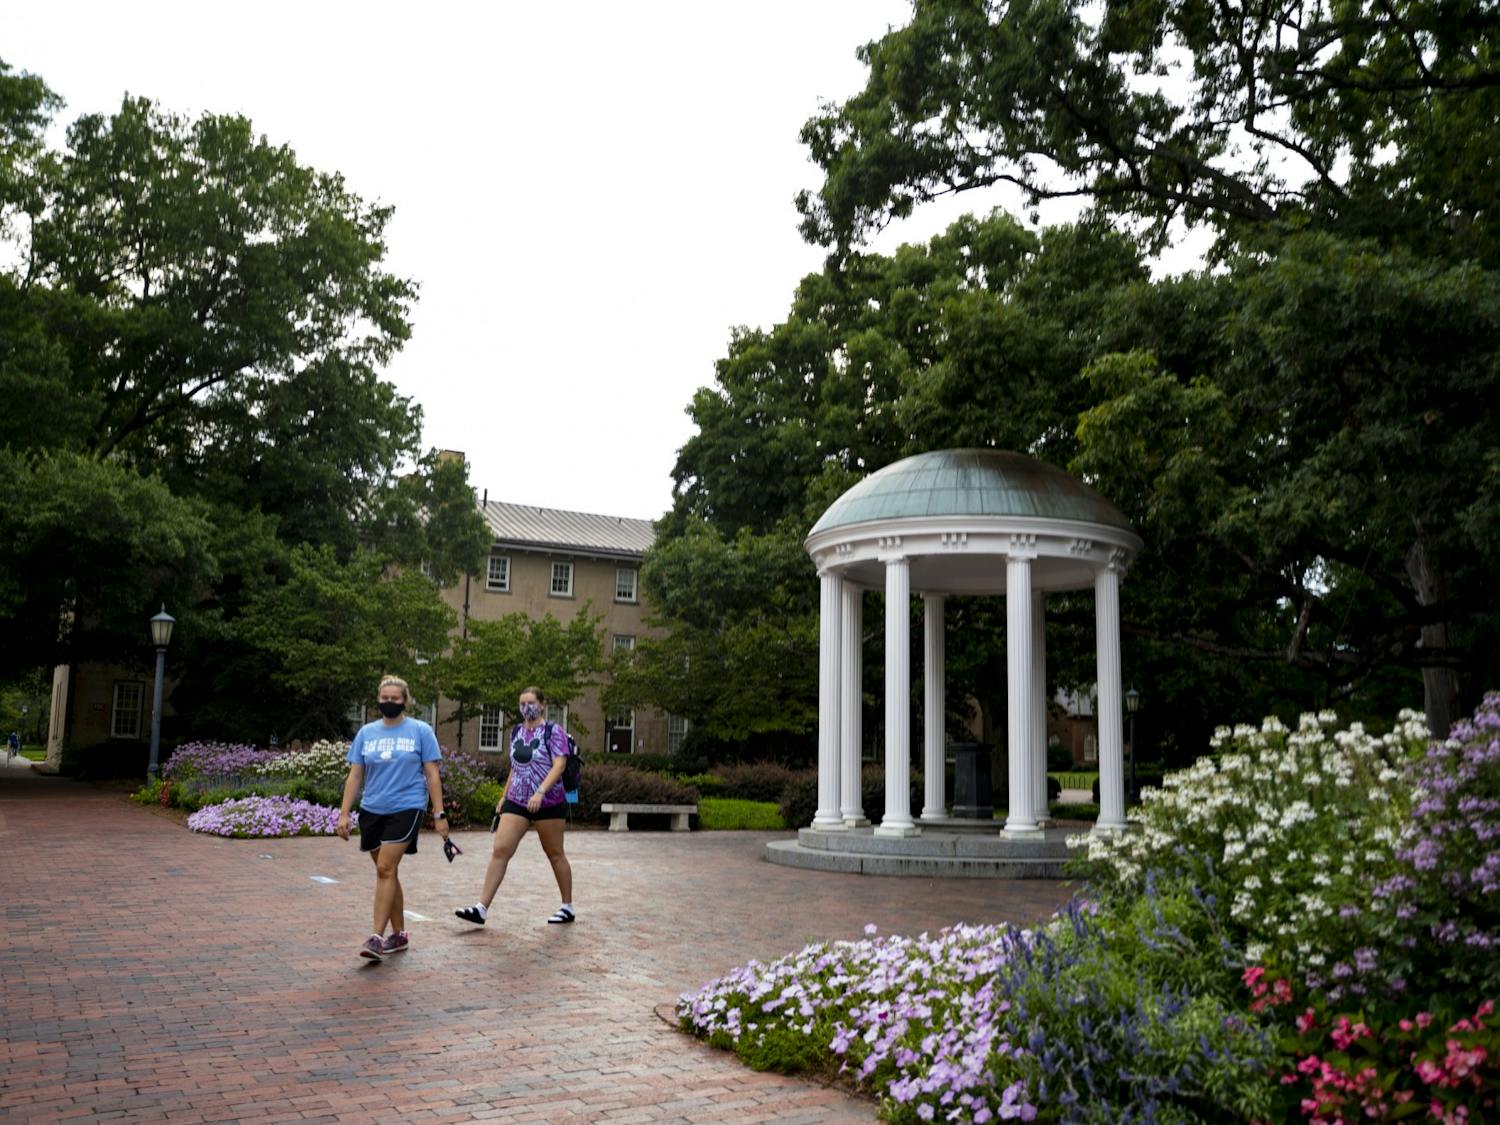 Students in masks walk past the old well on Friday, Aug. 14, 2020.